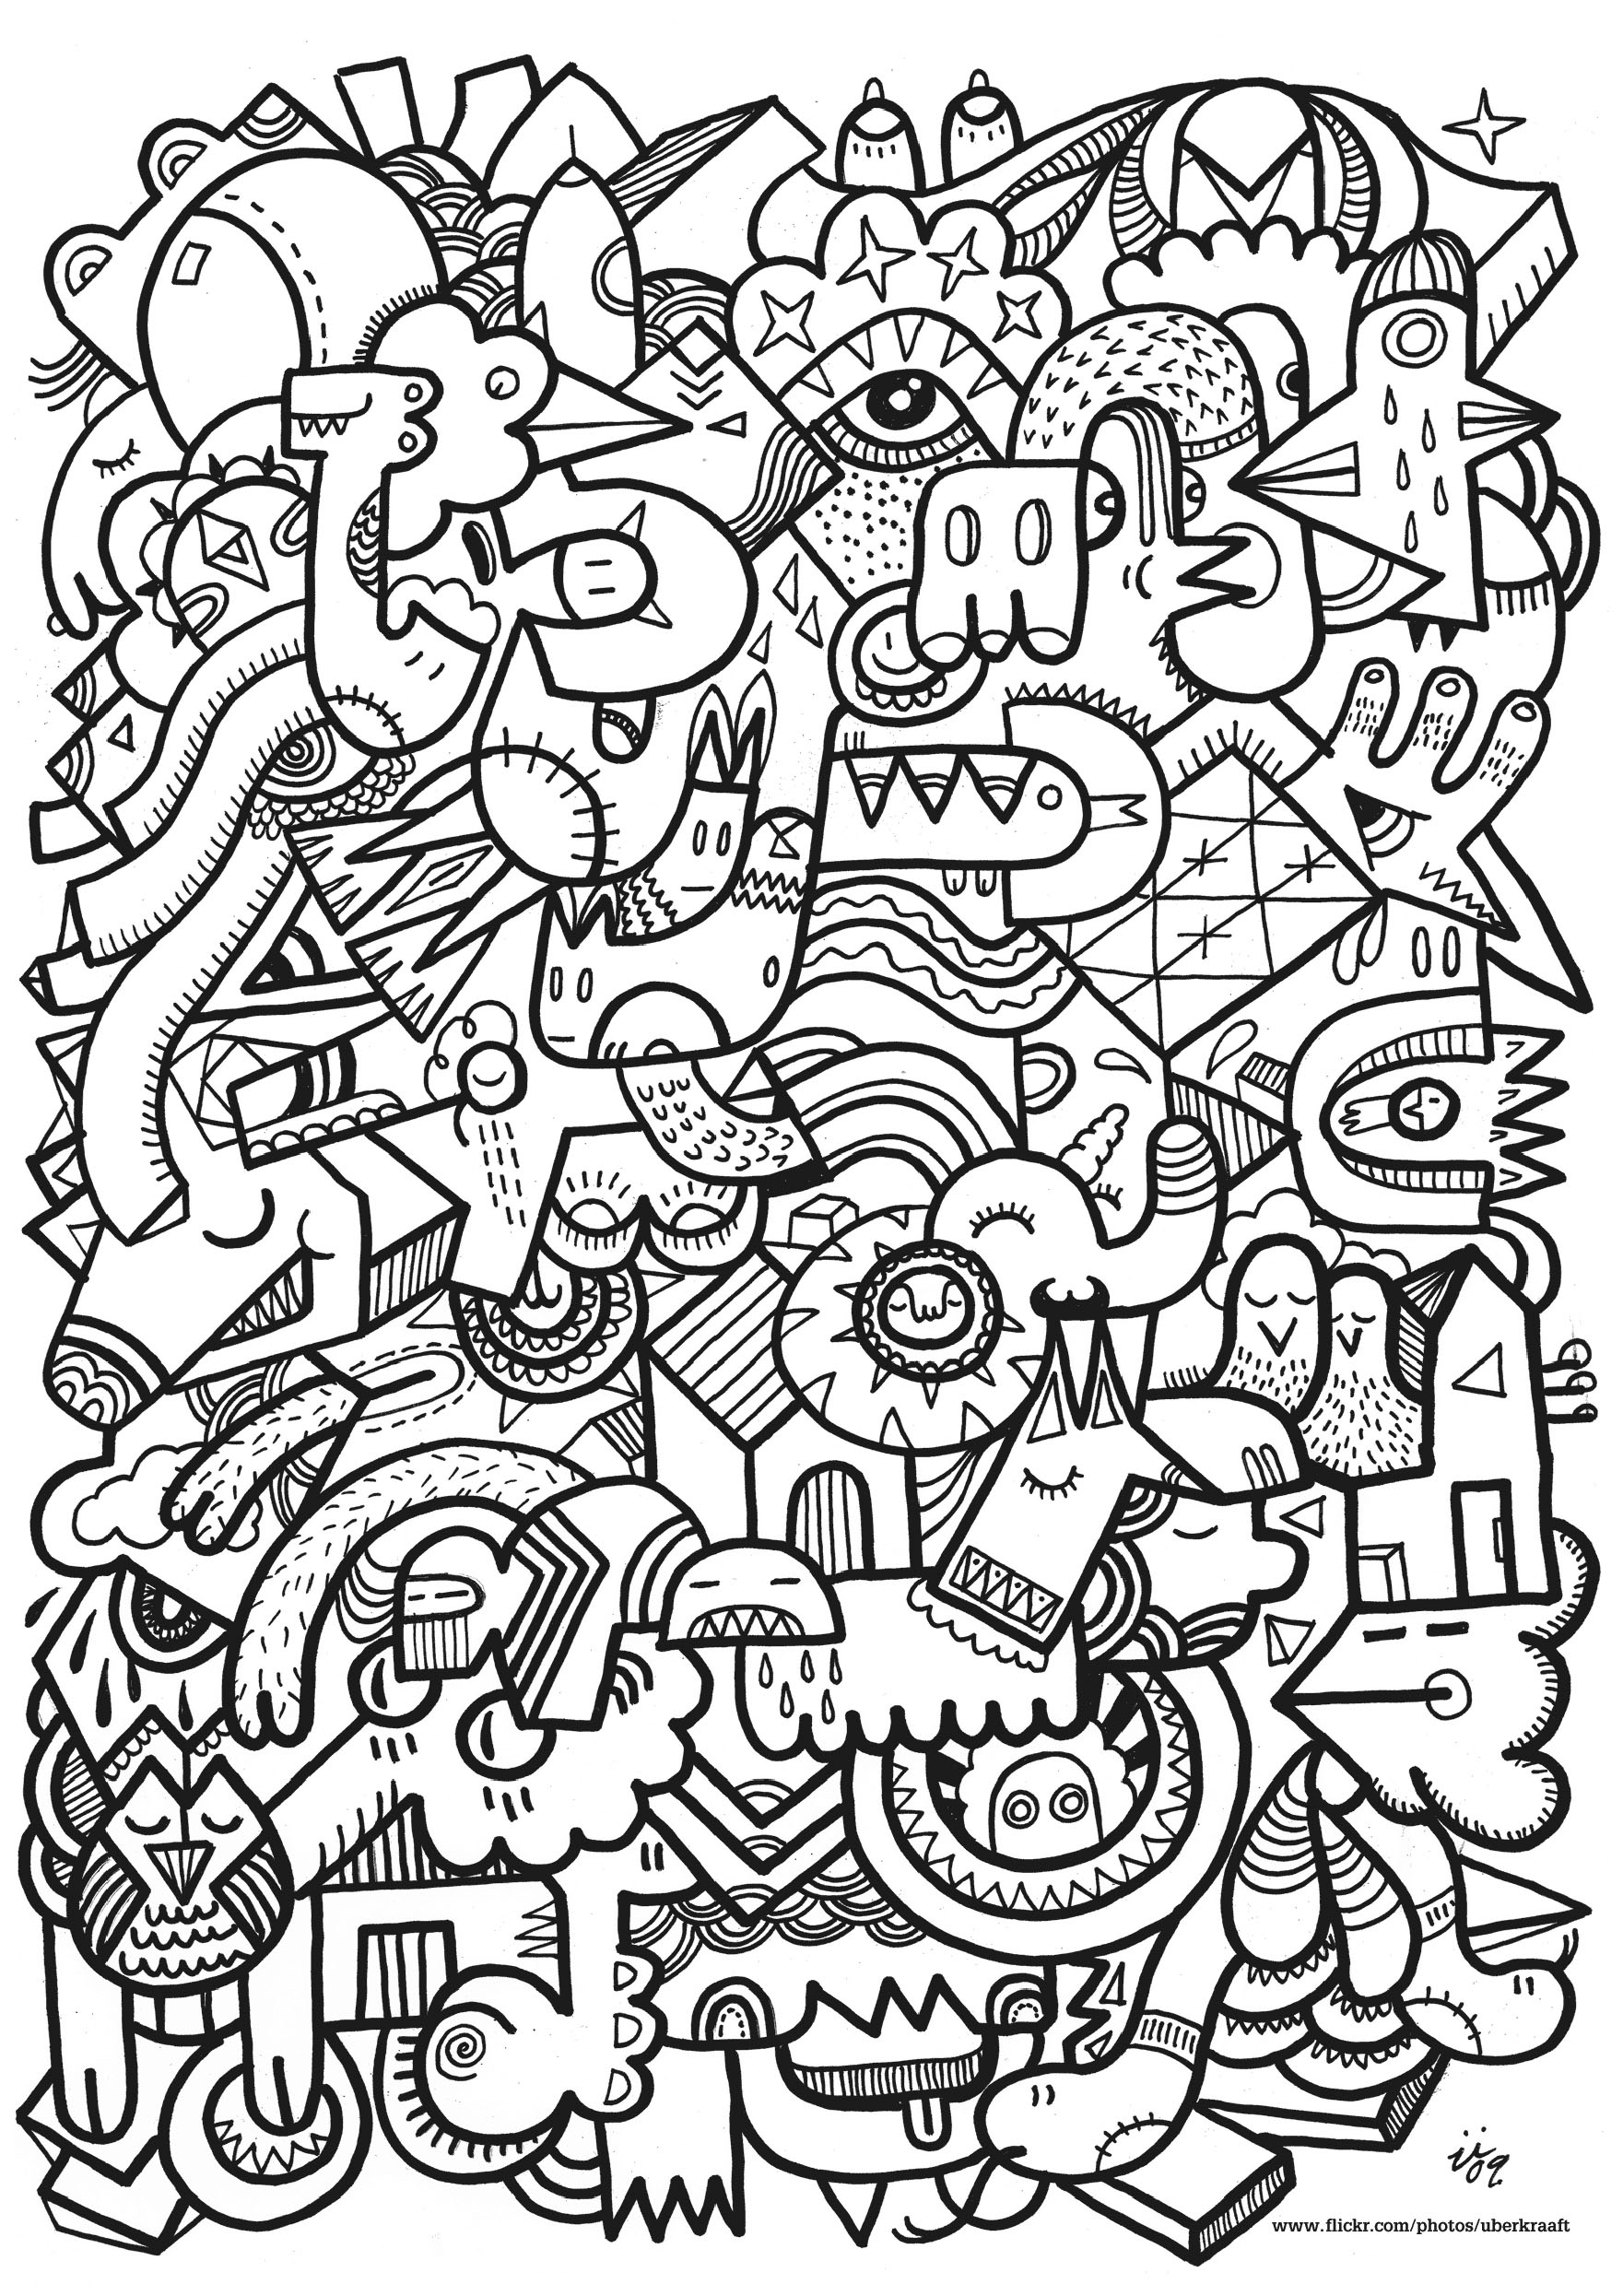 Doodle art doodling - 16 - Doodle Art / Doodling Adult Coloring Pages